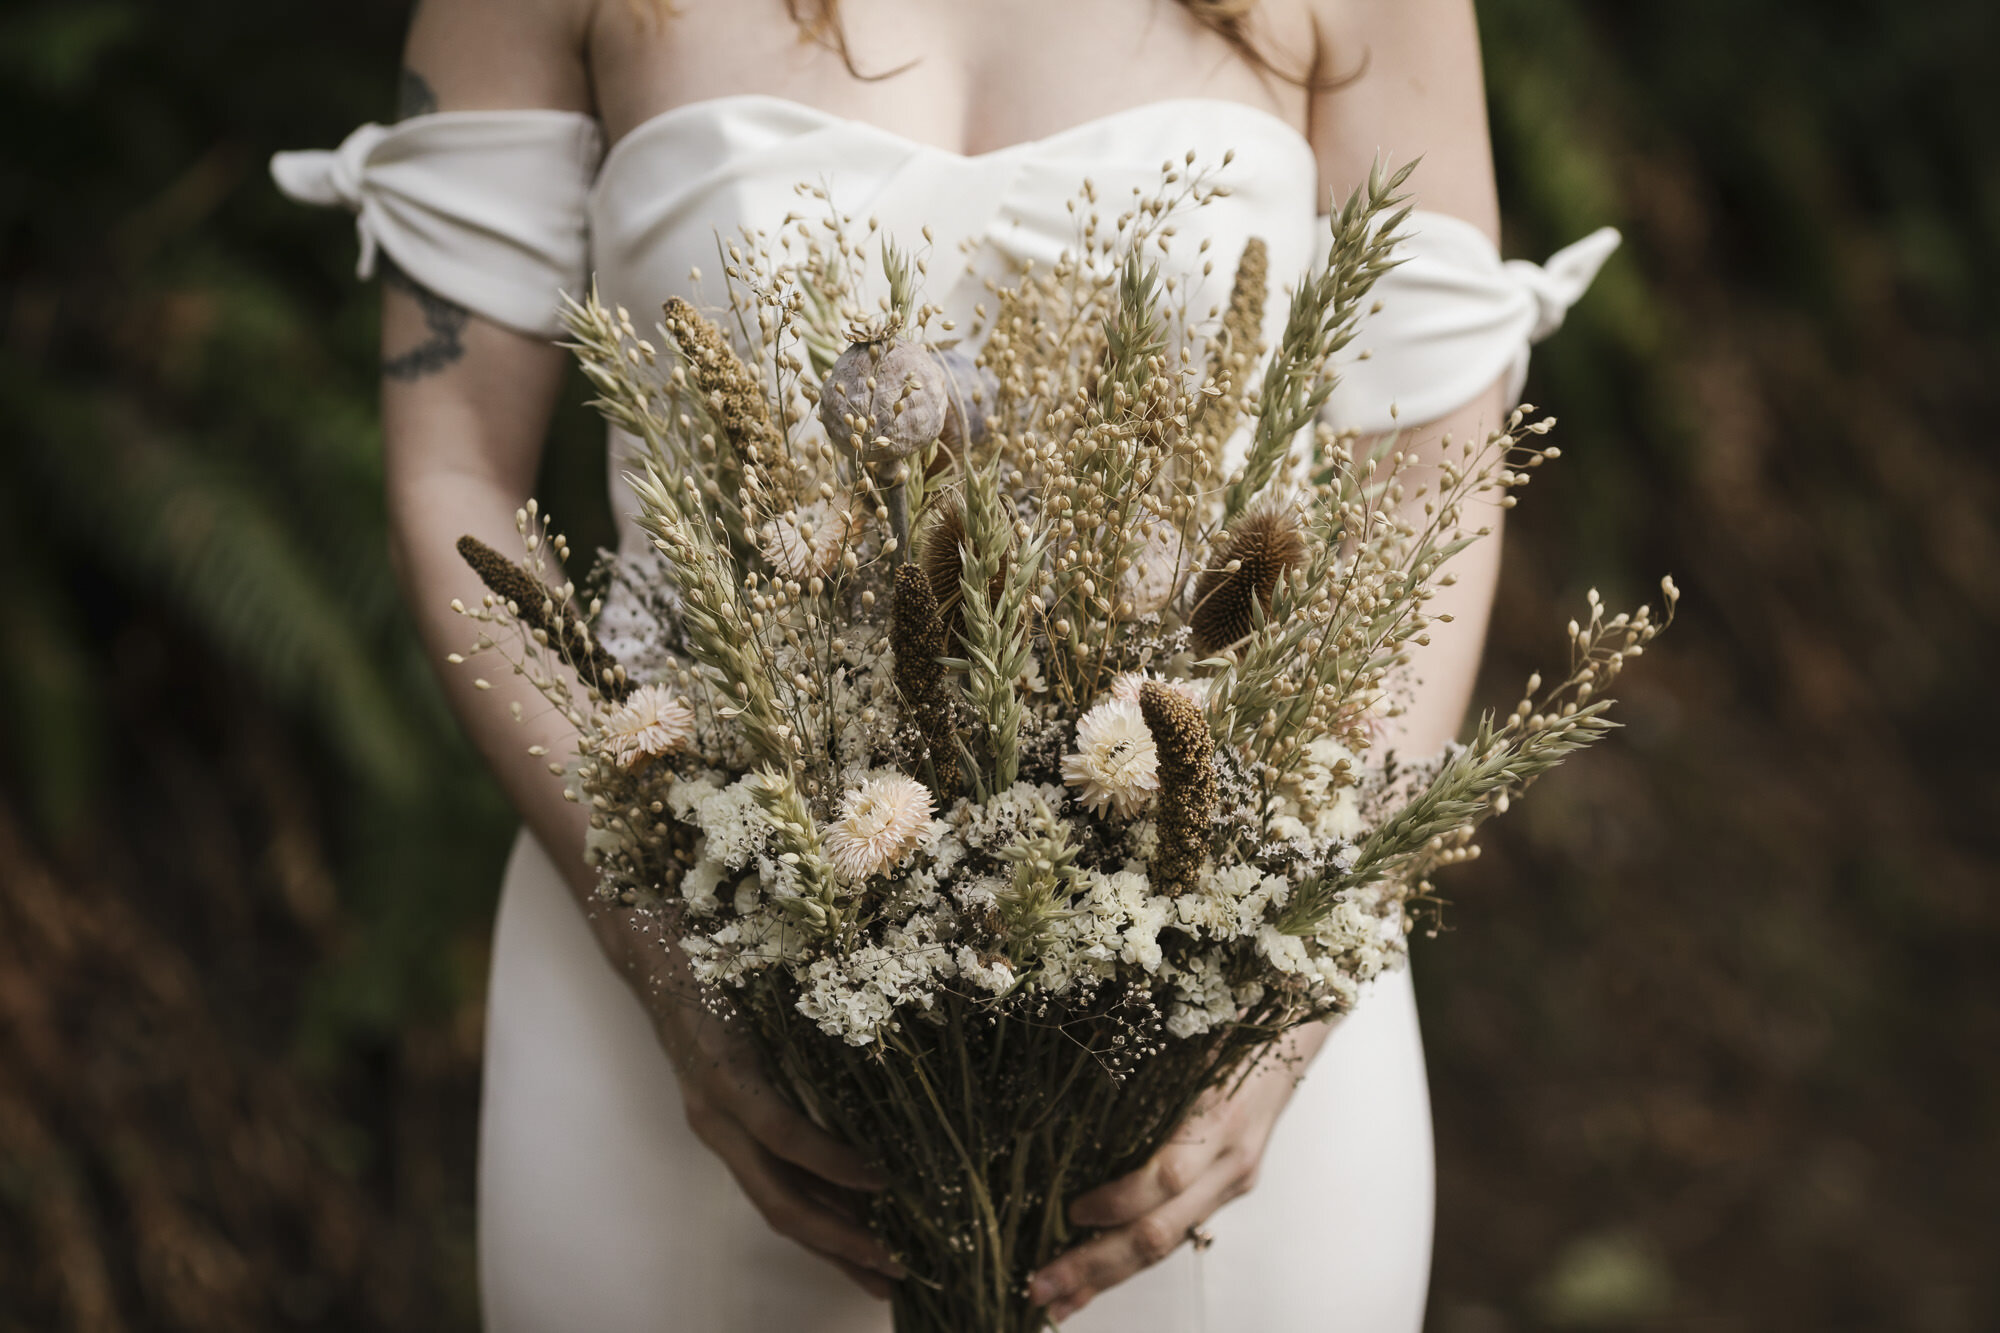 PNW bride holds bouquet of dried flowers on her wedding day in Washington